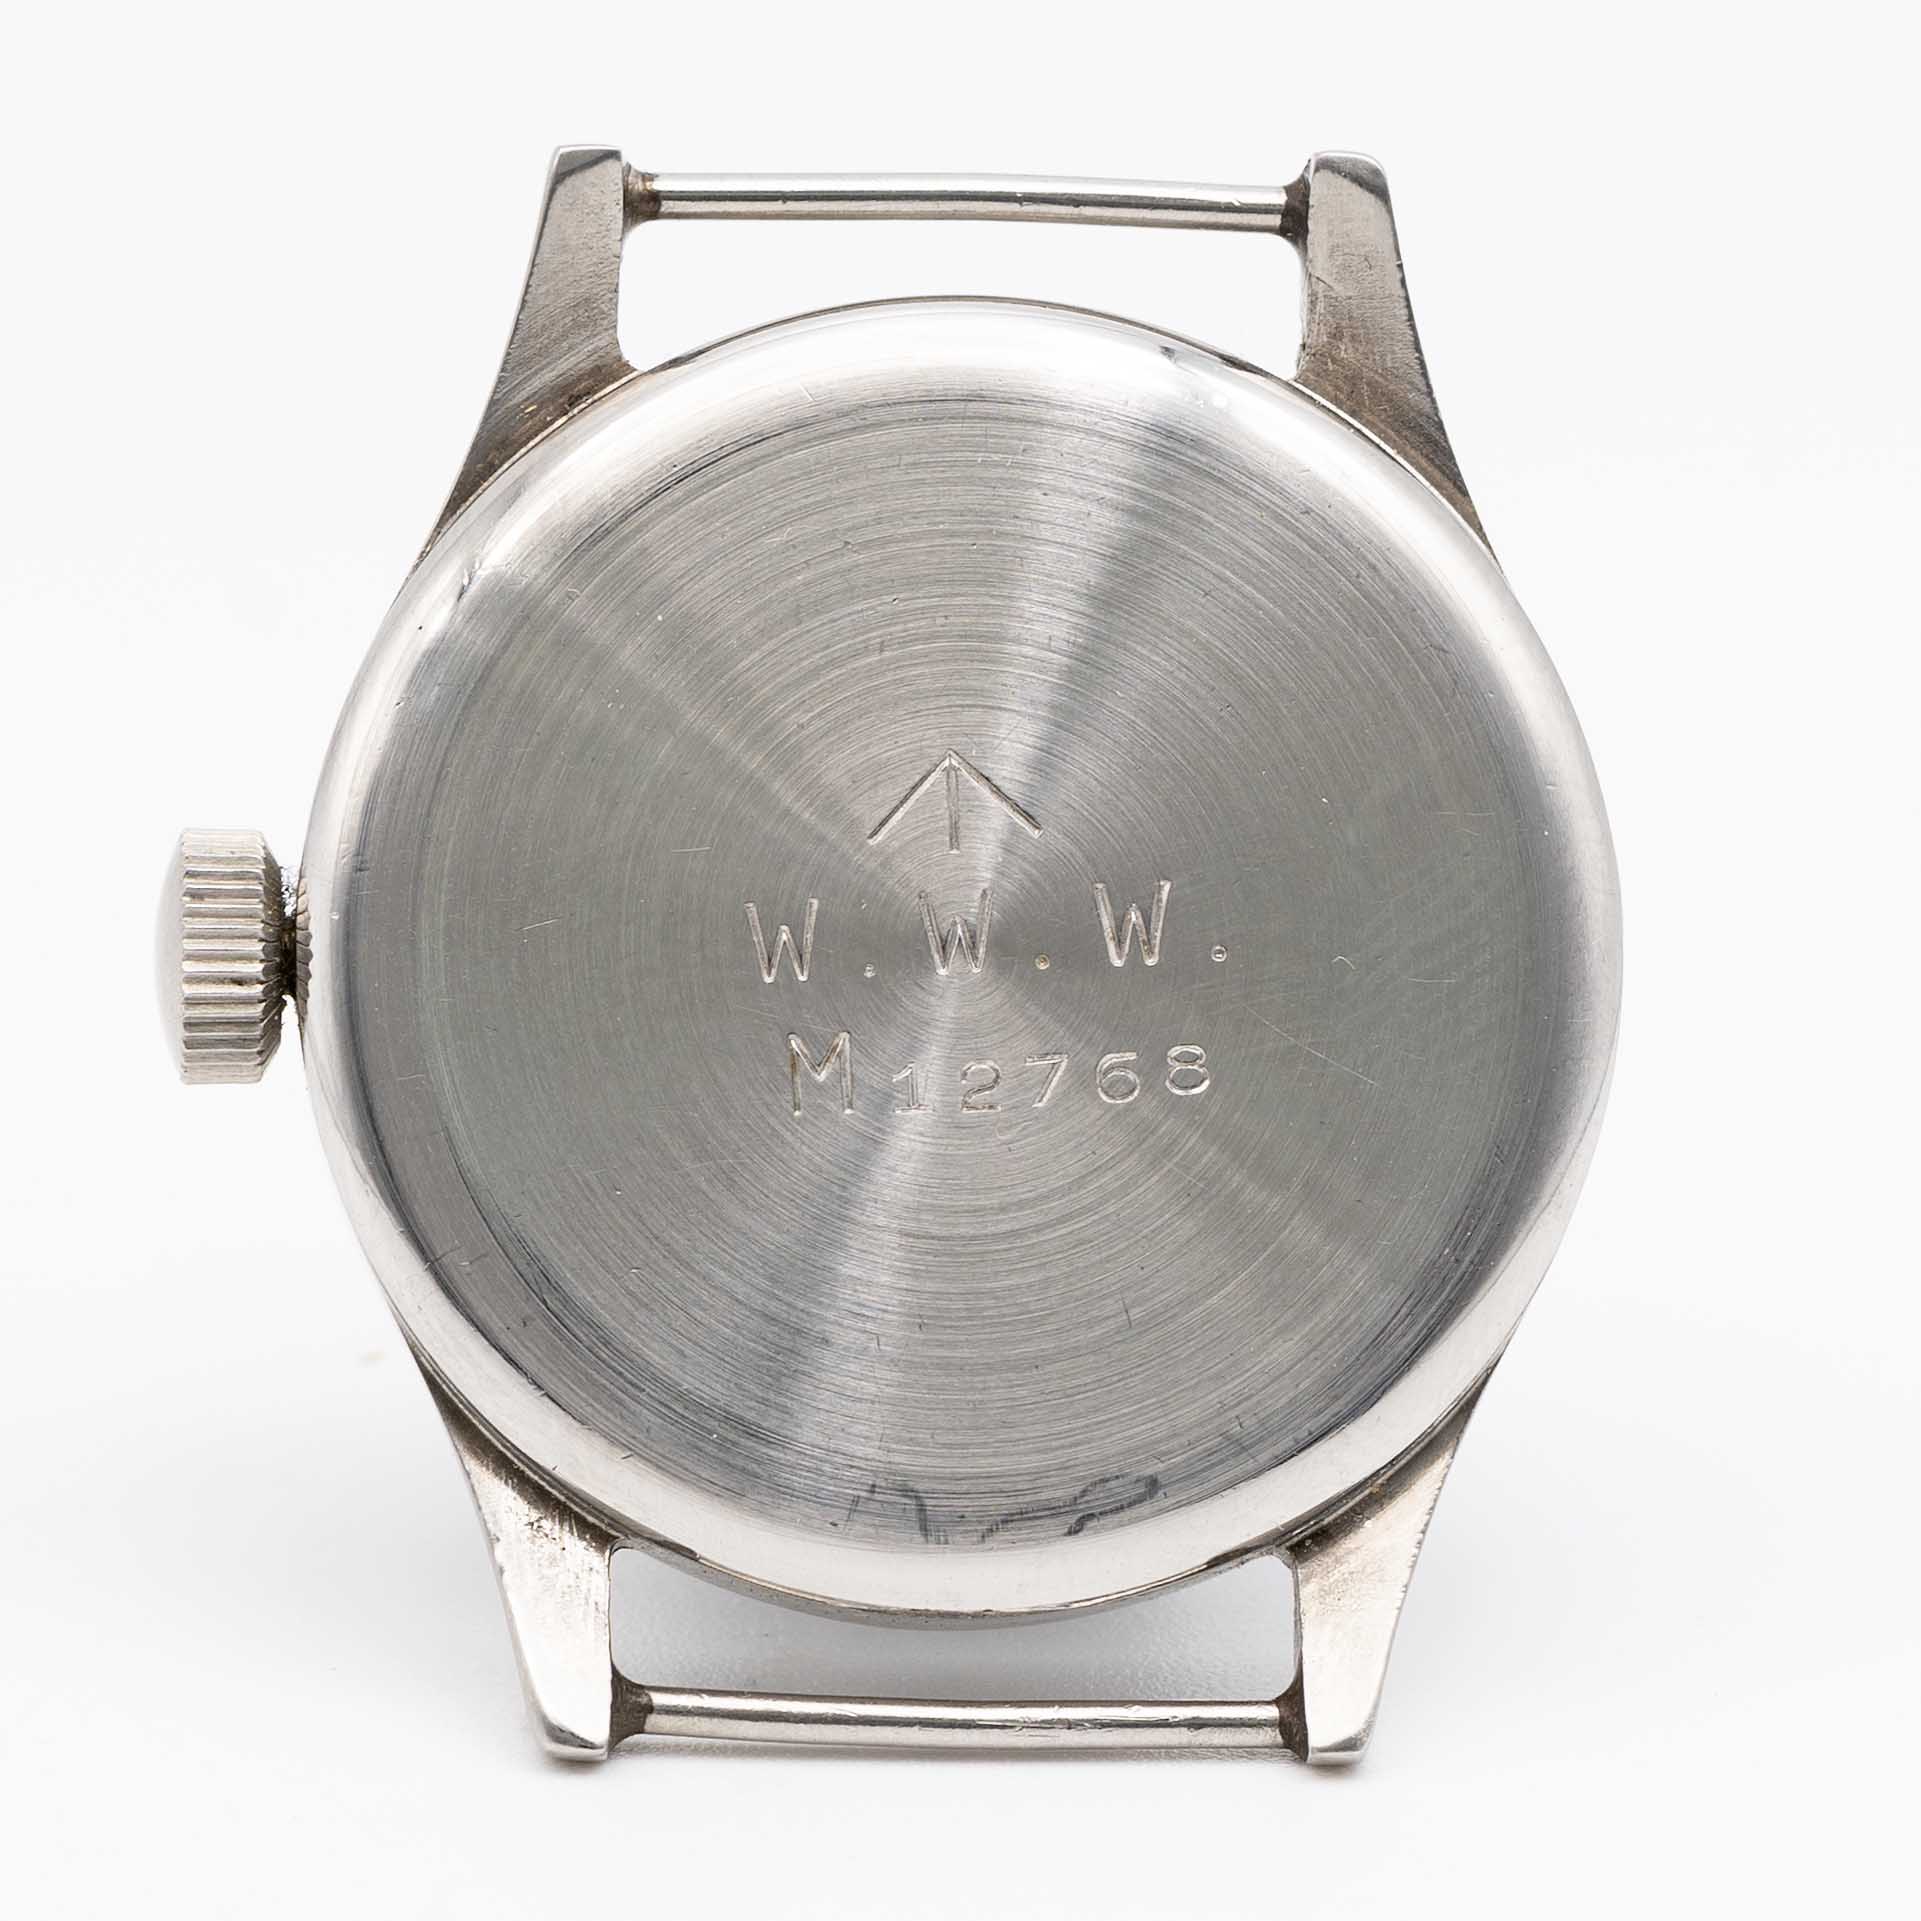 A GENTLEMAN'S STAINLESS STEEL BRITISH MILITARY IWC MARK 10 W.W.W. WRIST WATCH CIRCA 1945, PART OF - Image 5 of 8